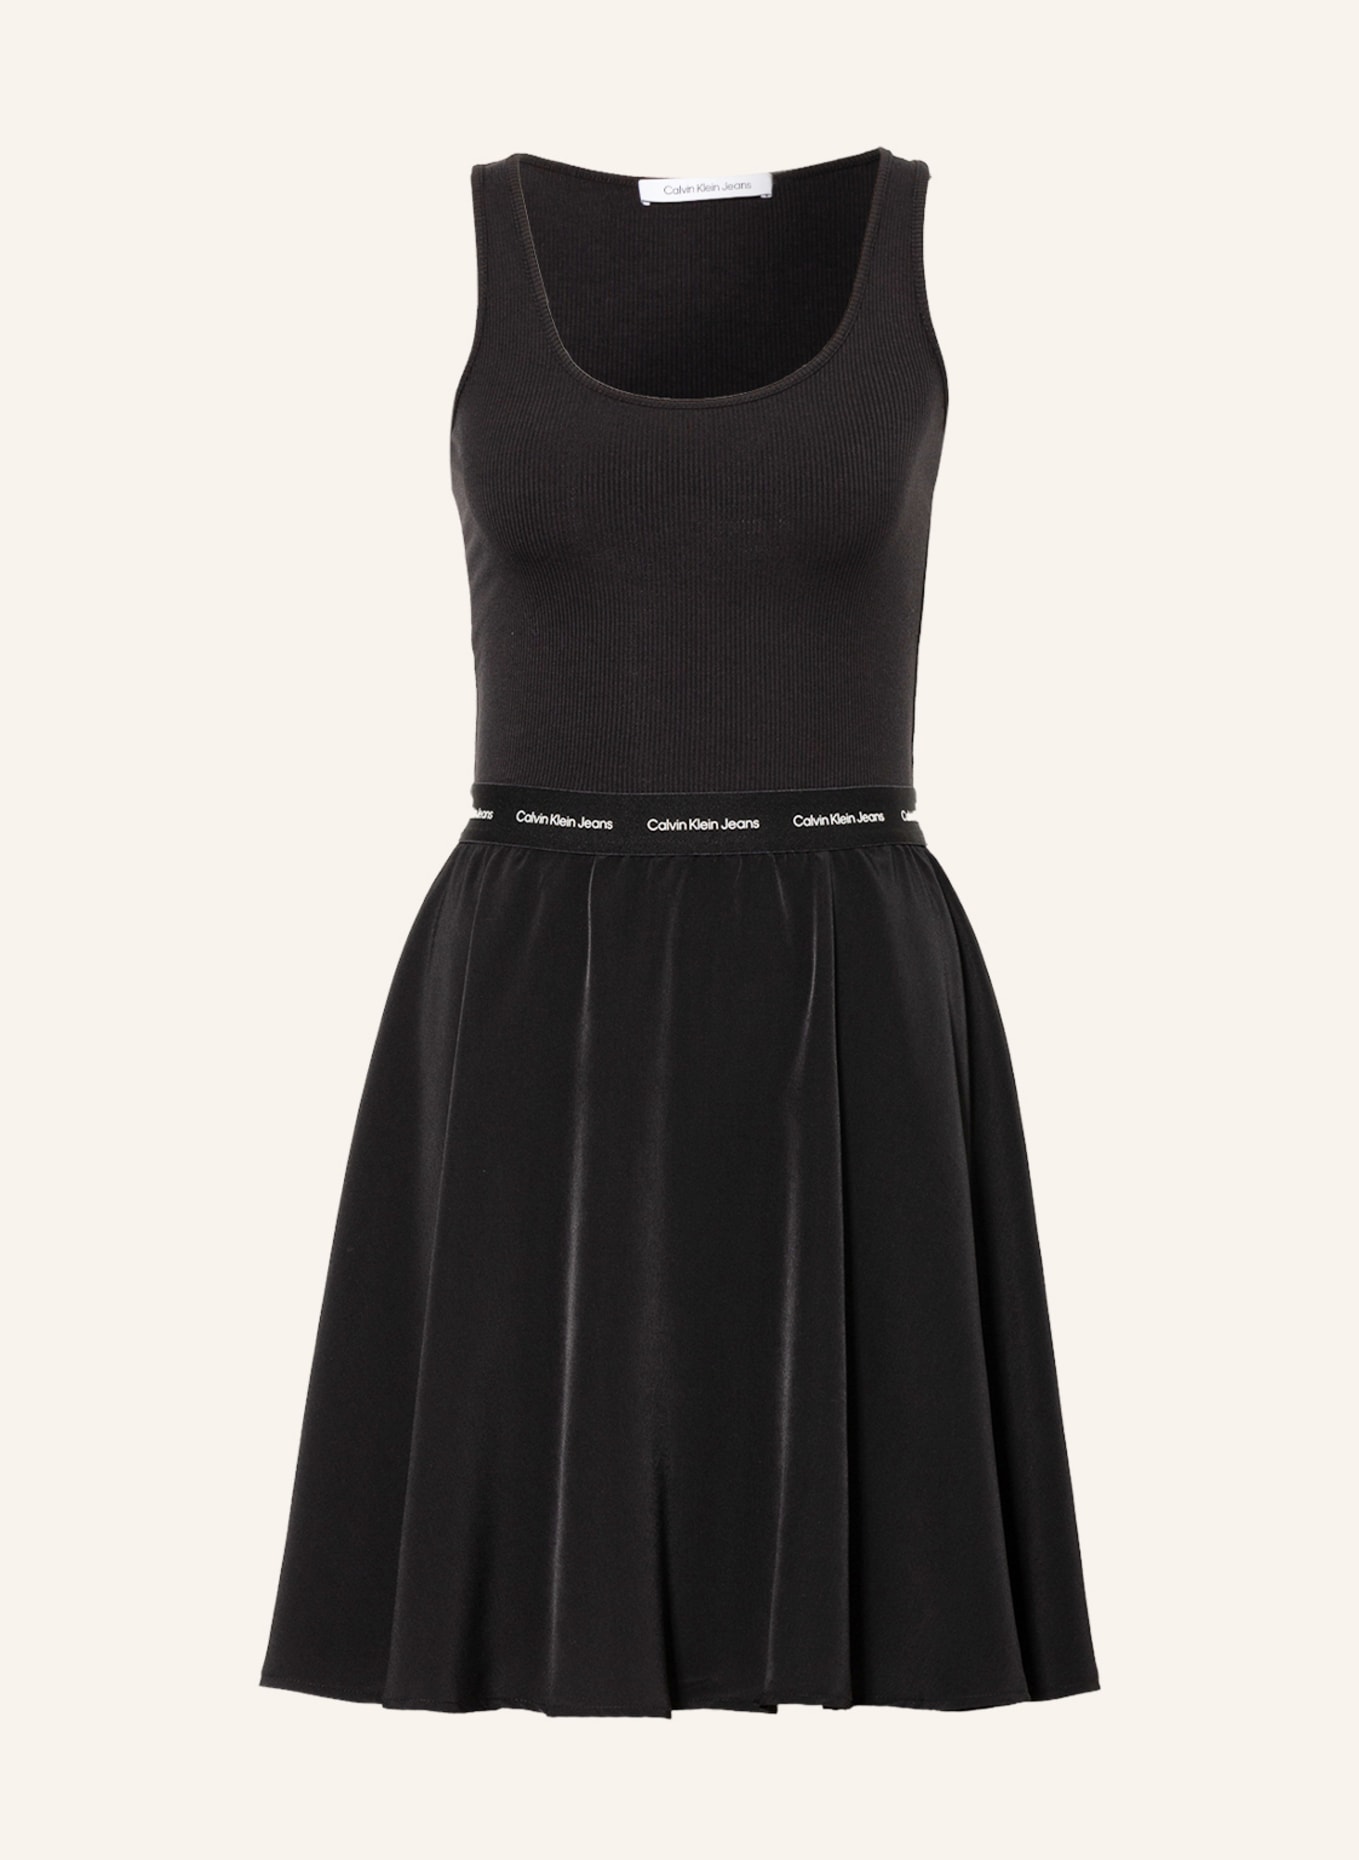 Calvin Klein Jeans Dress in mixed materials in black